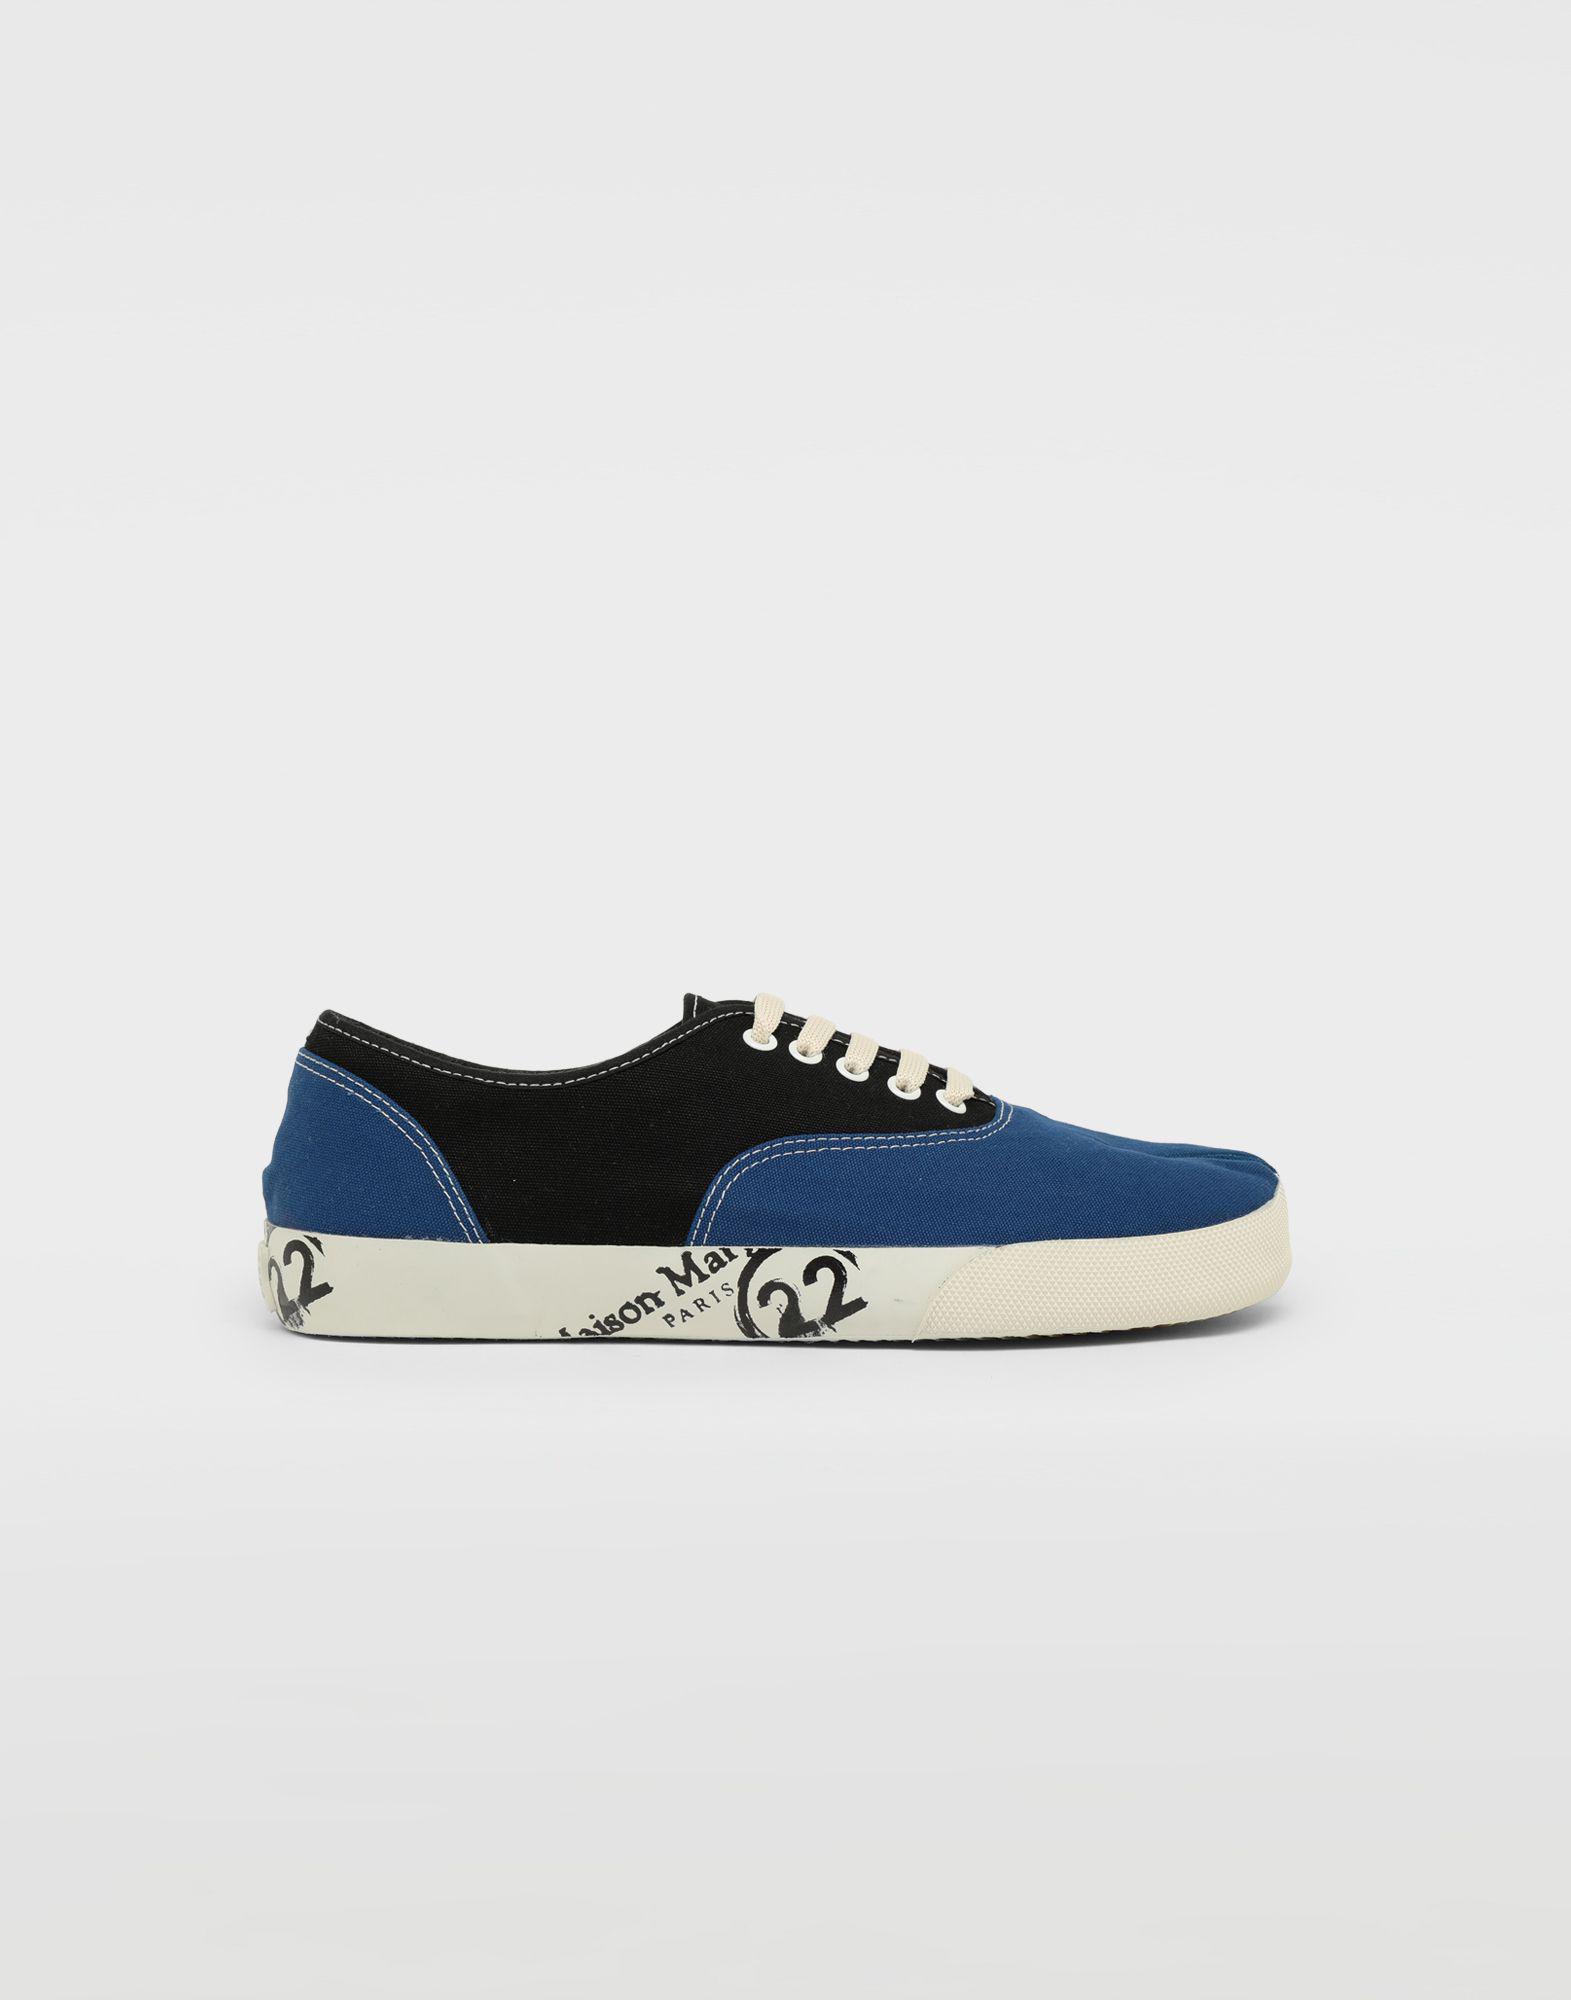 Maison Margiela Tabi Lace-up Shoes in Blue for Men - Lyst